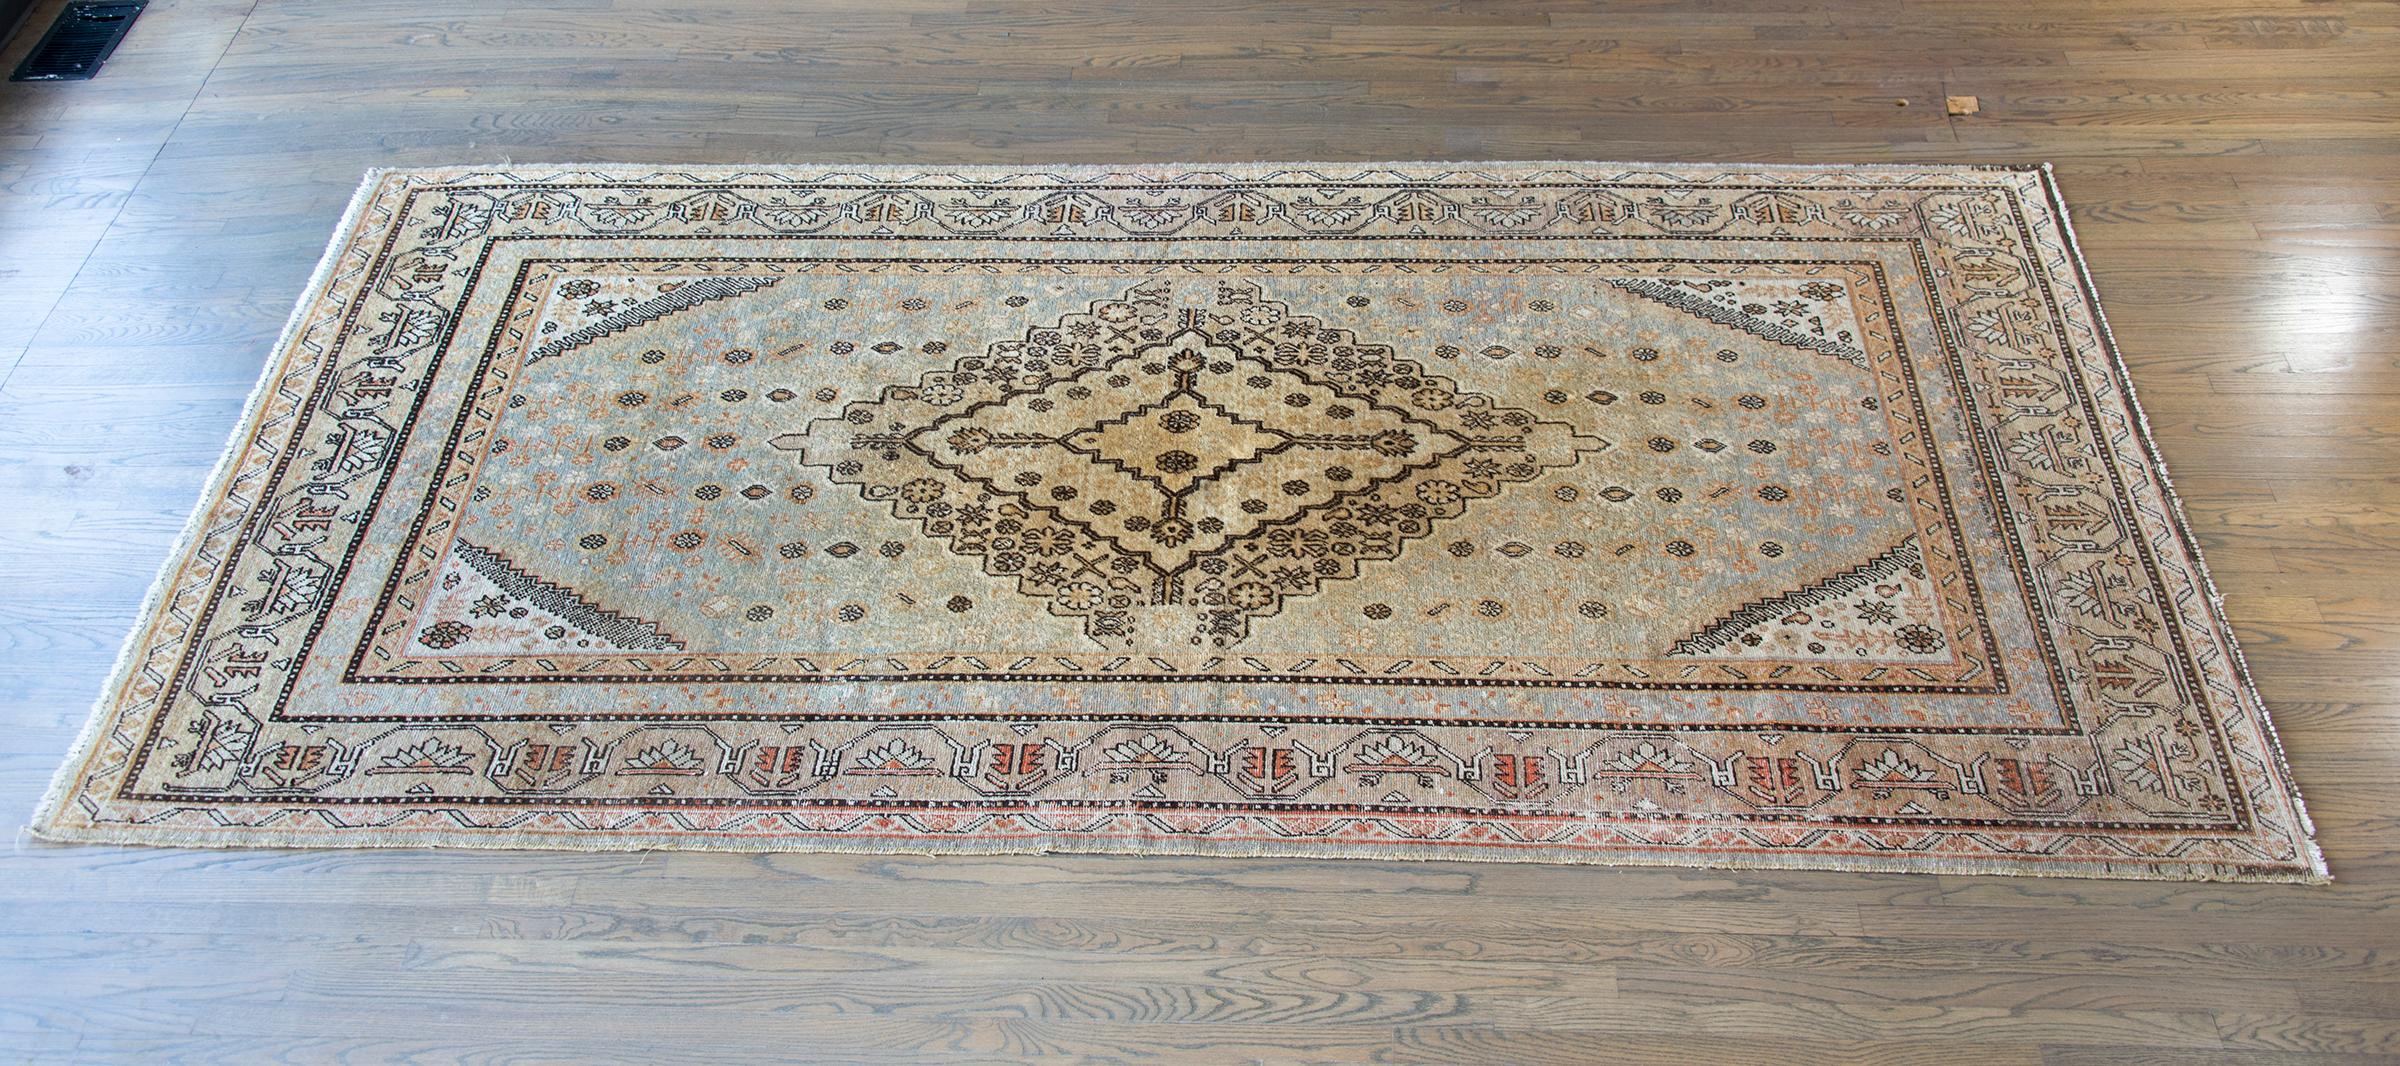 Early 20th Century Central Asian Samarghand Rug For Sale 7